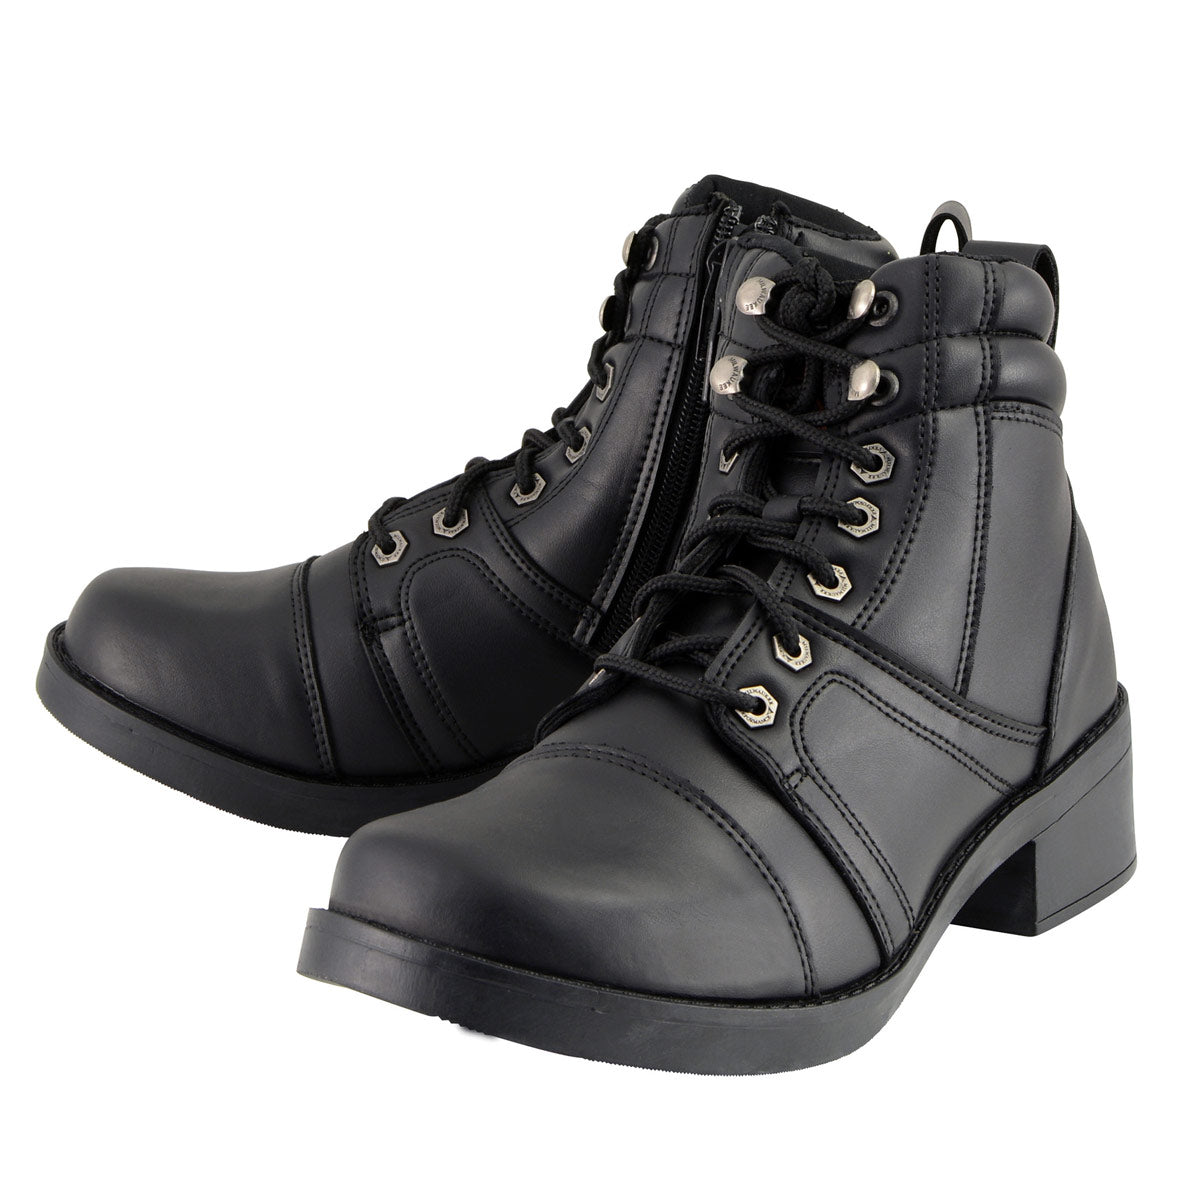 Milwaukee Leather MBK9255 Boys Black Lace-Up Boots with Side Zipper Entry